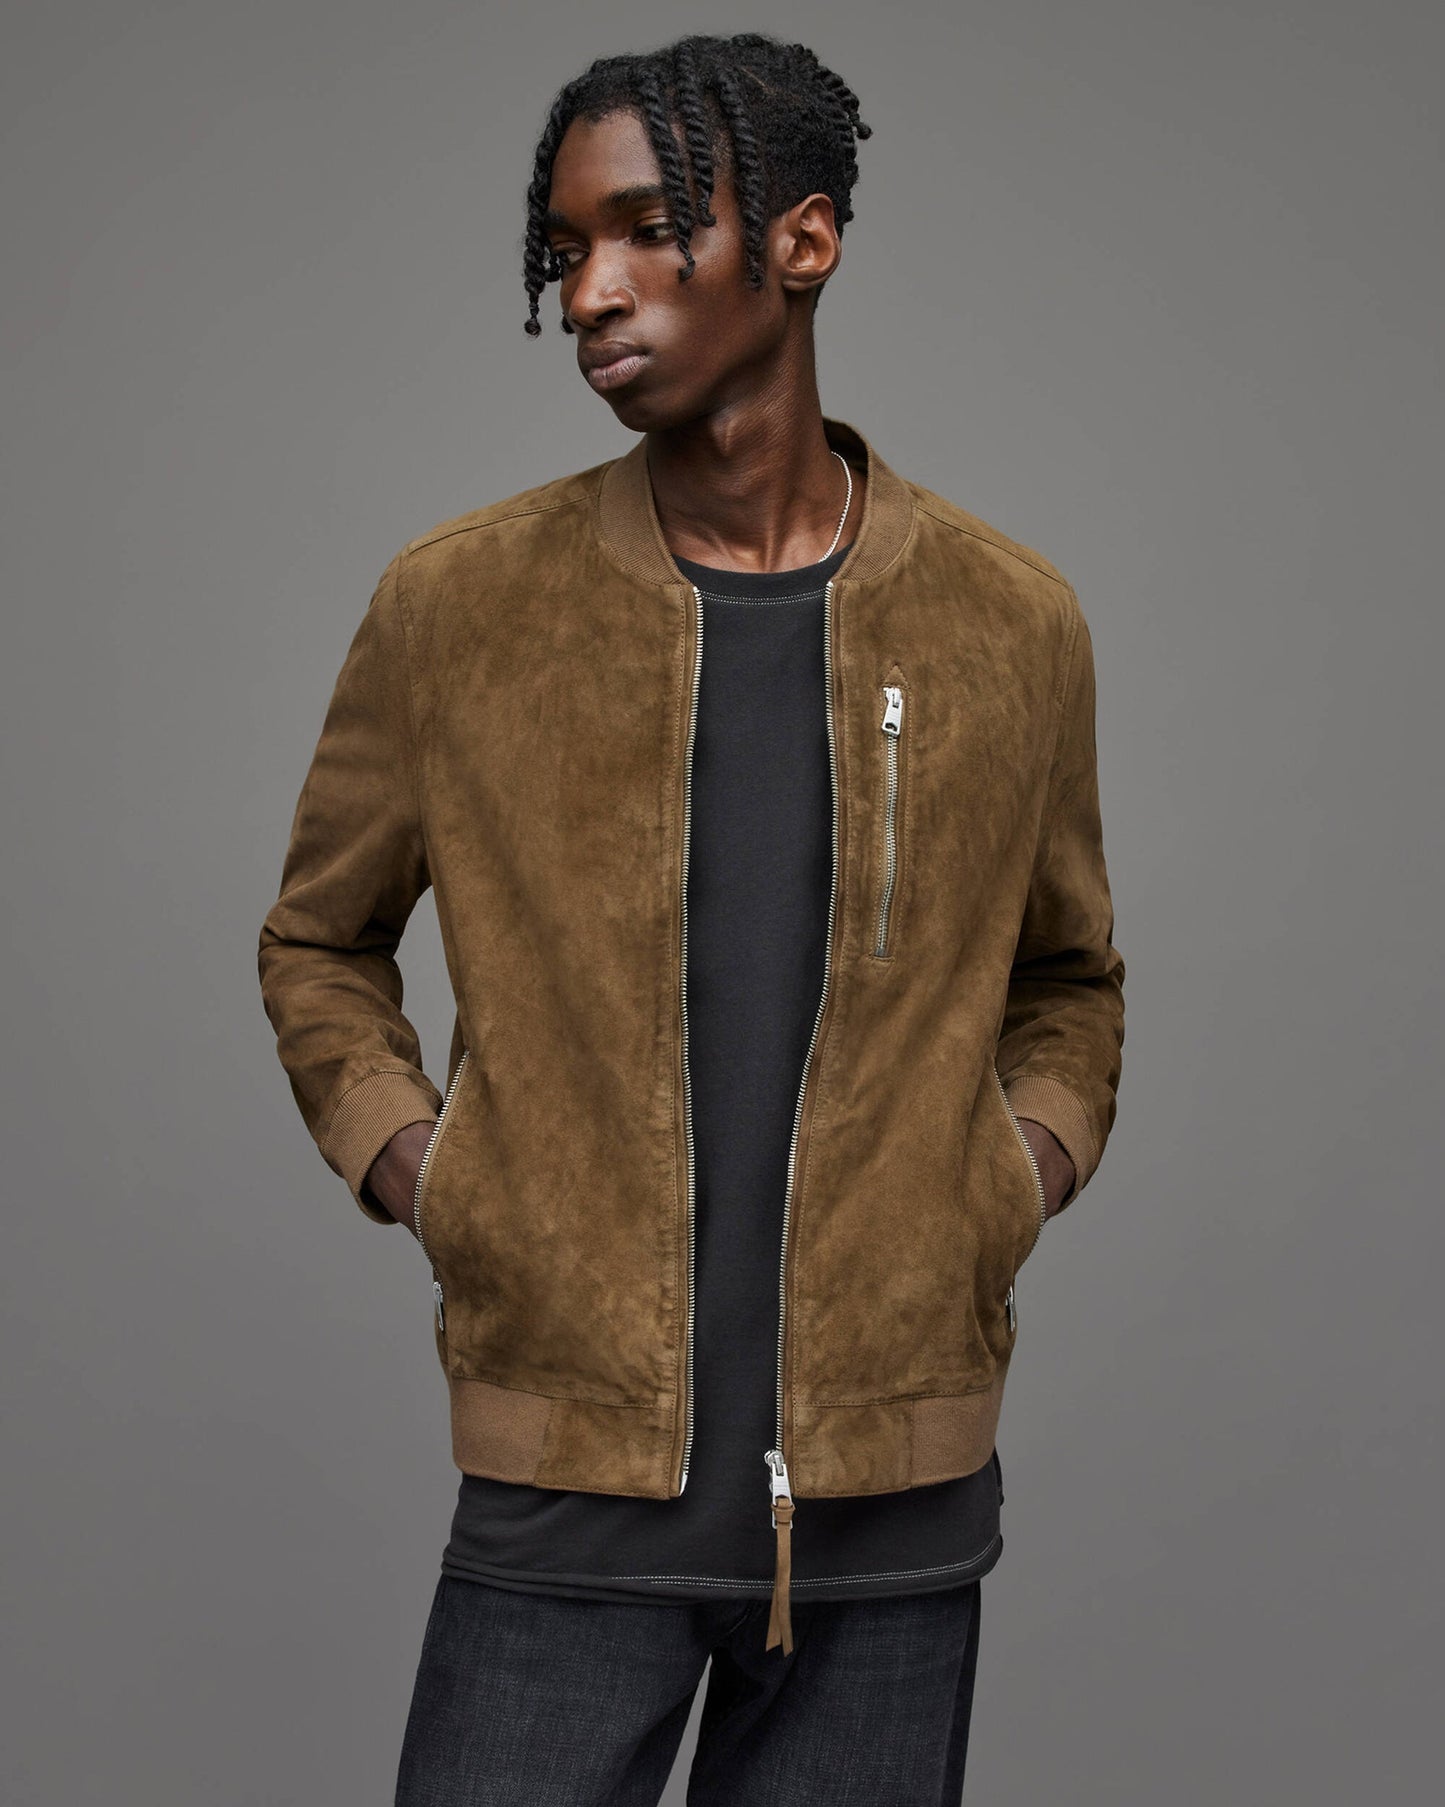 Men's Suede Leather Bomber Jacket In Tan Brown